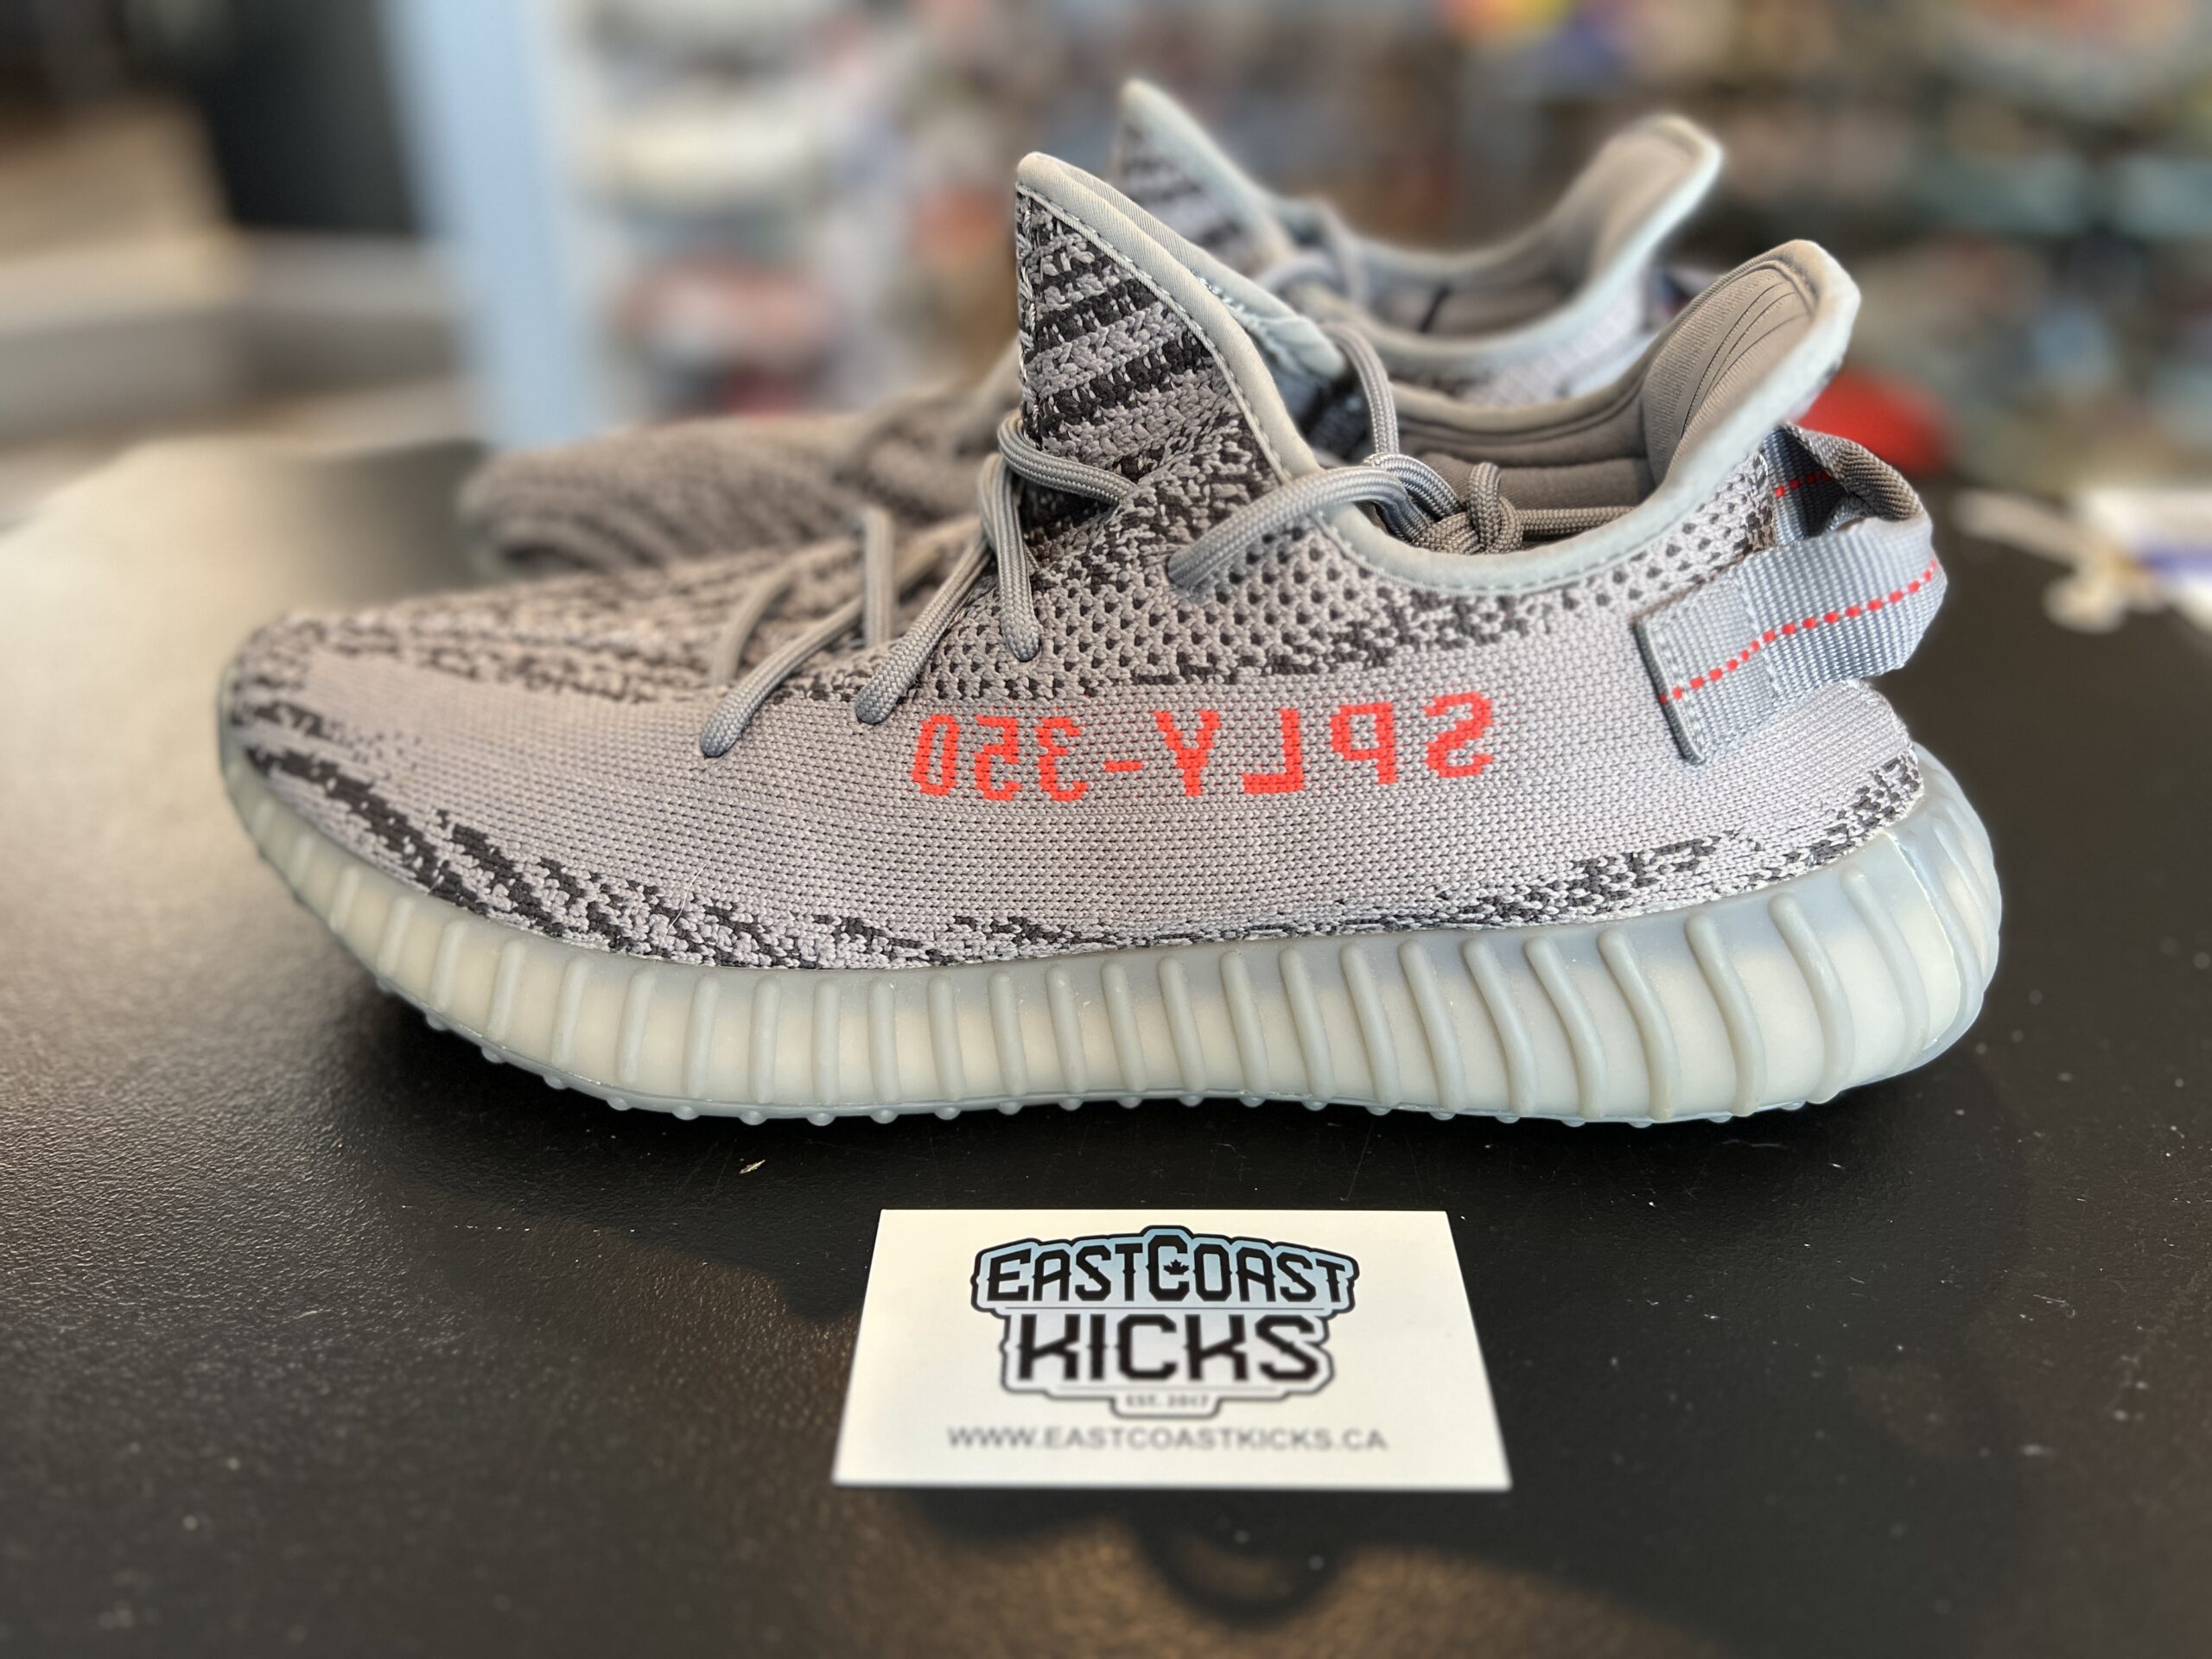 Preowned Adidas Yeezy Boost 350 V2 Beluga 2.0 Size 12